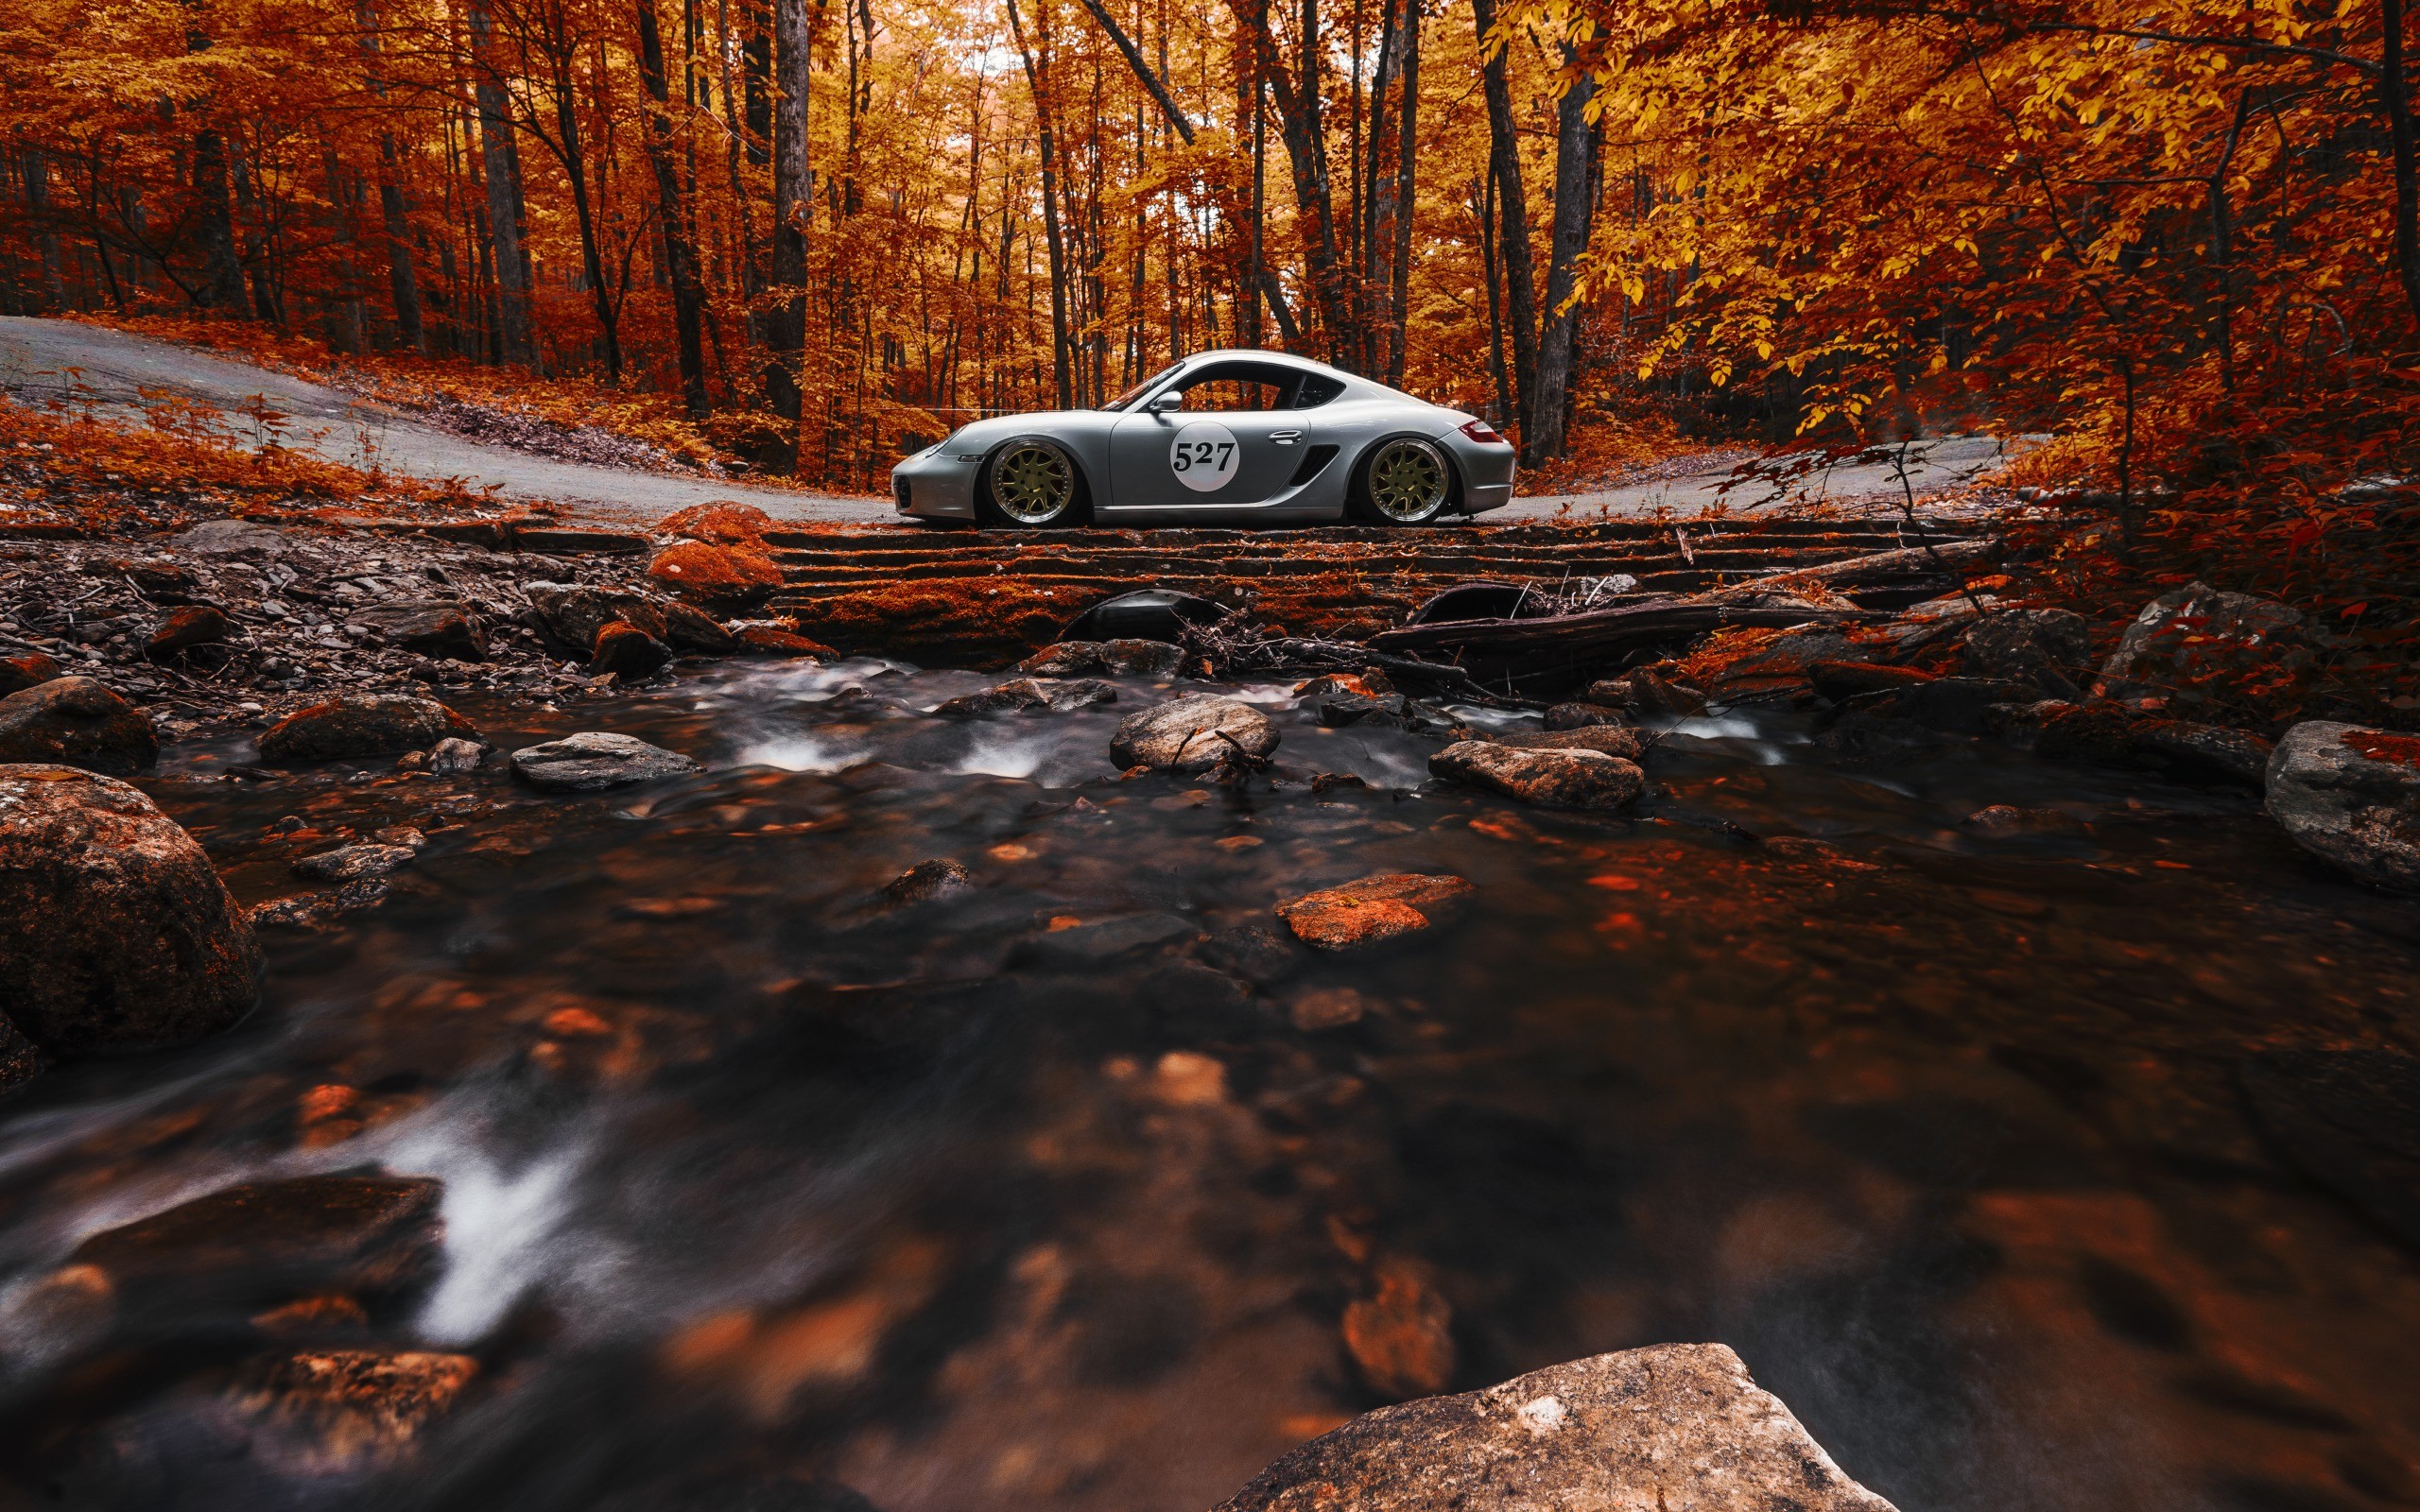 nature, Car, Trees, Forest, Fall, Vehicle, Leaves, Long Exposure, Stream, Stones, Road, Rock, Porsche Cayman, Sports Car, Side View Wallpaper HD / Desktop and Mobile Background